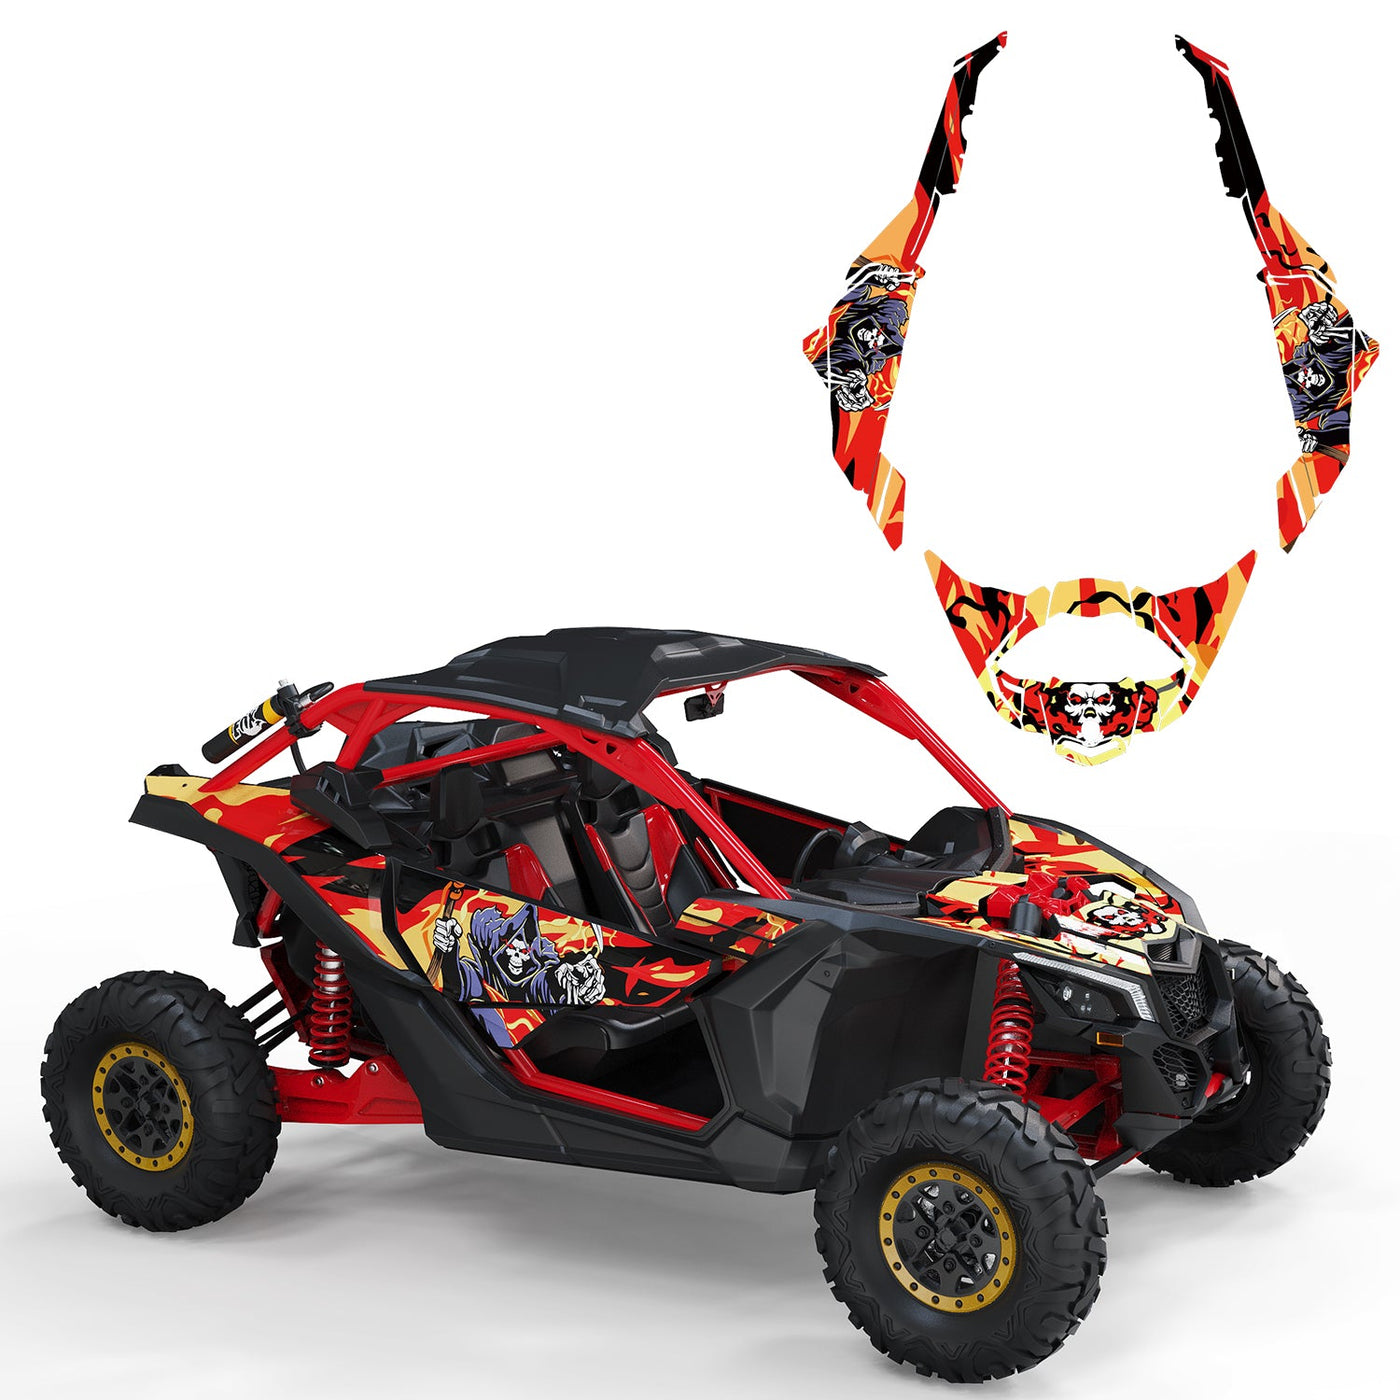 Graphic Decal fit Can Am Maverick X3 | Grim Reaper